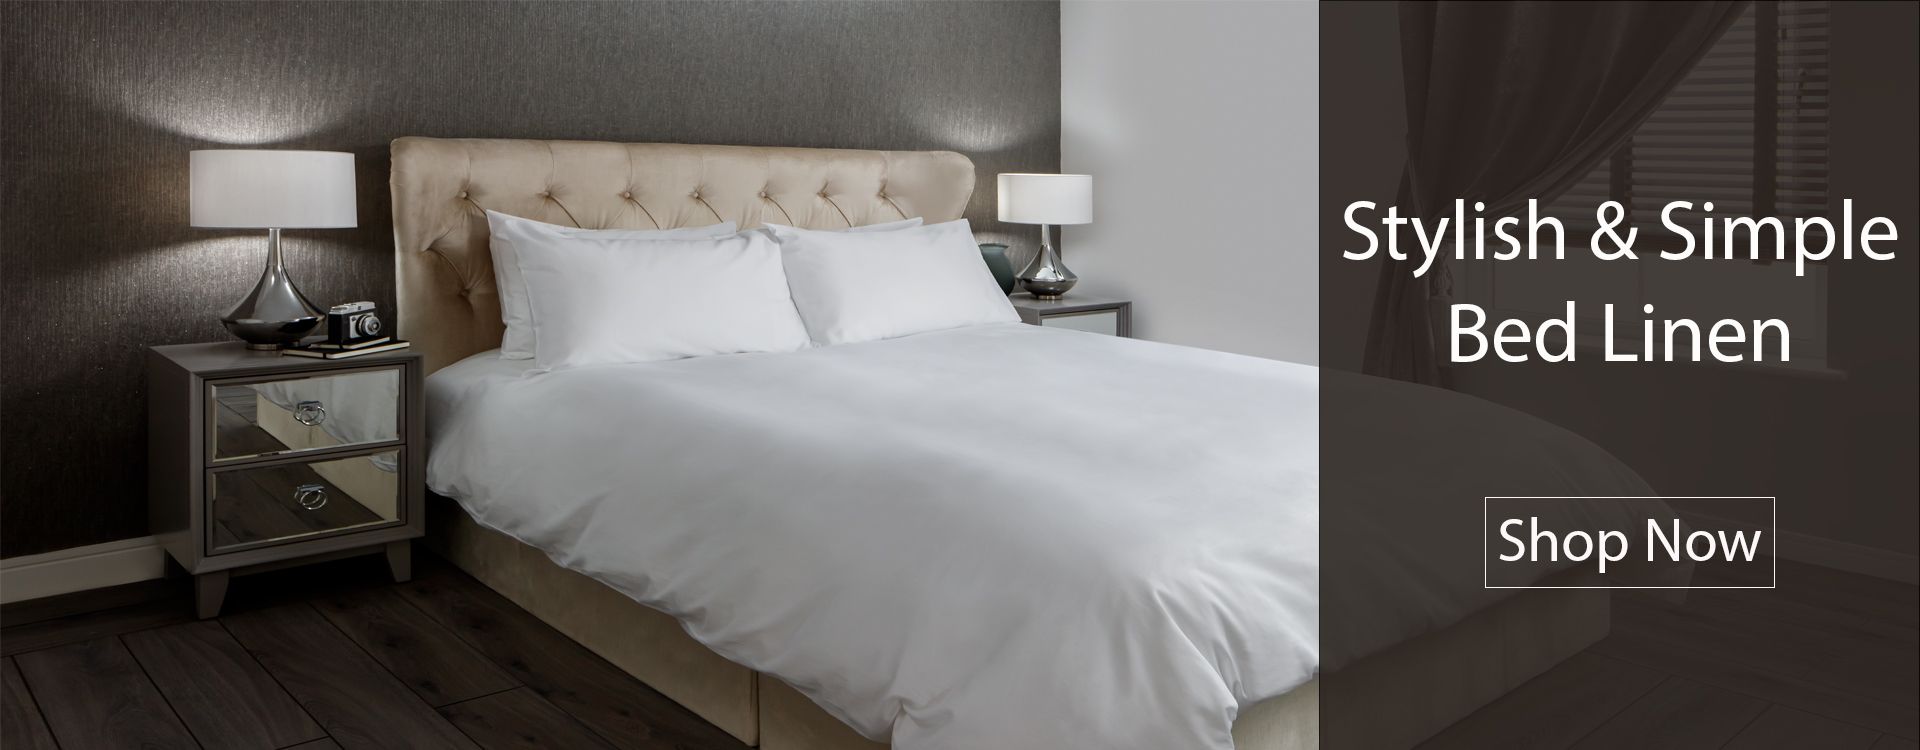 Stylish & Simple Bed Linen